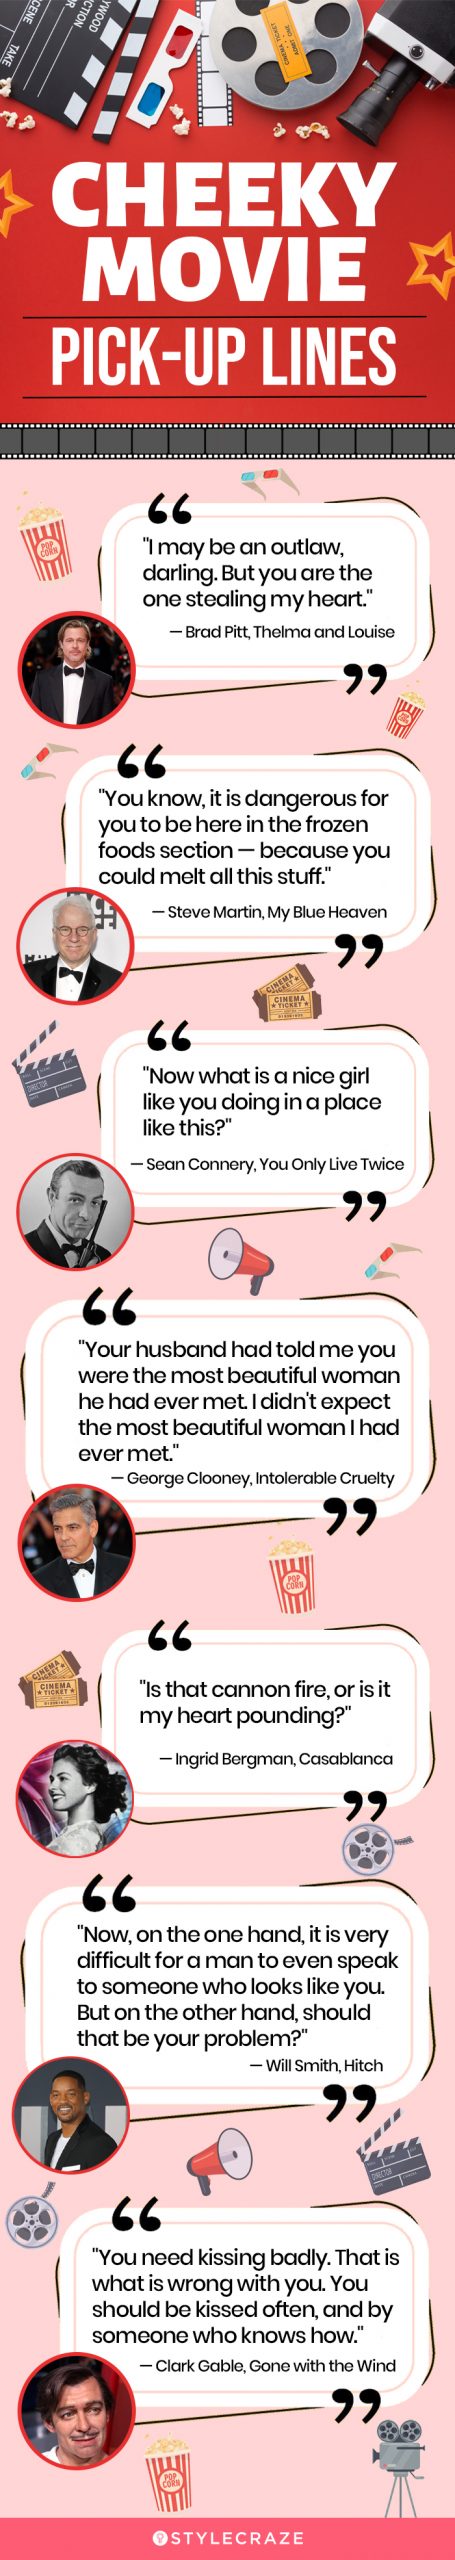 cheeky movie pick up lines (infographic)